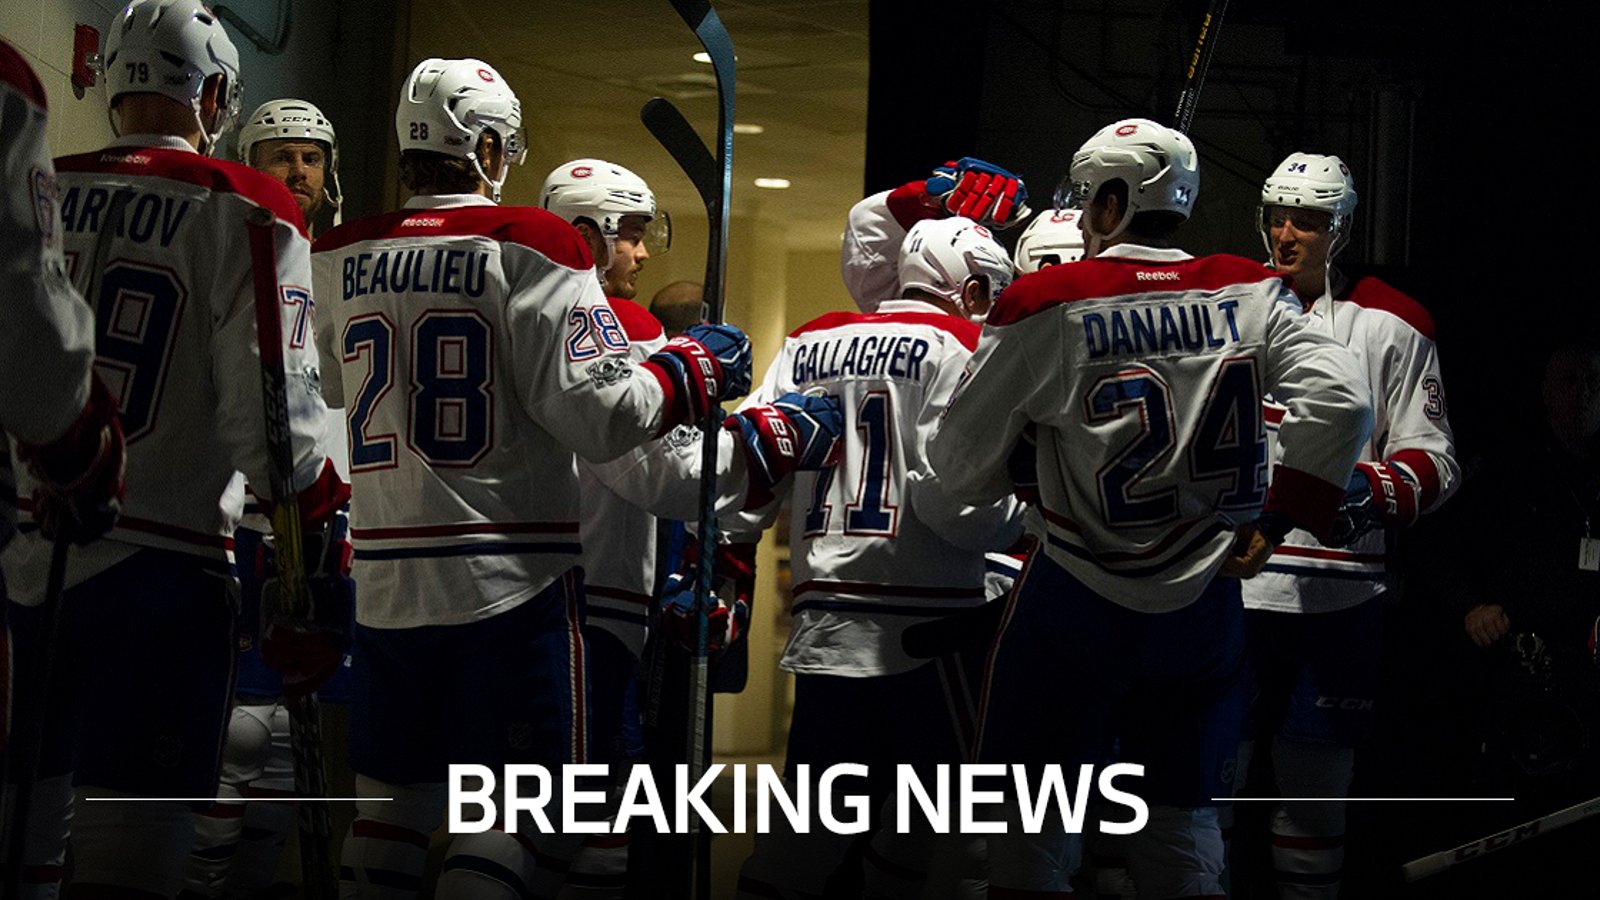 Breaking: Two star players out for the Habs due to injury. 